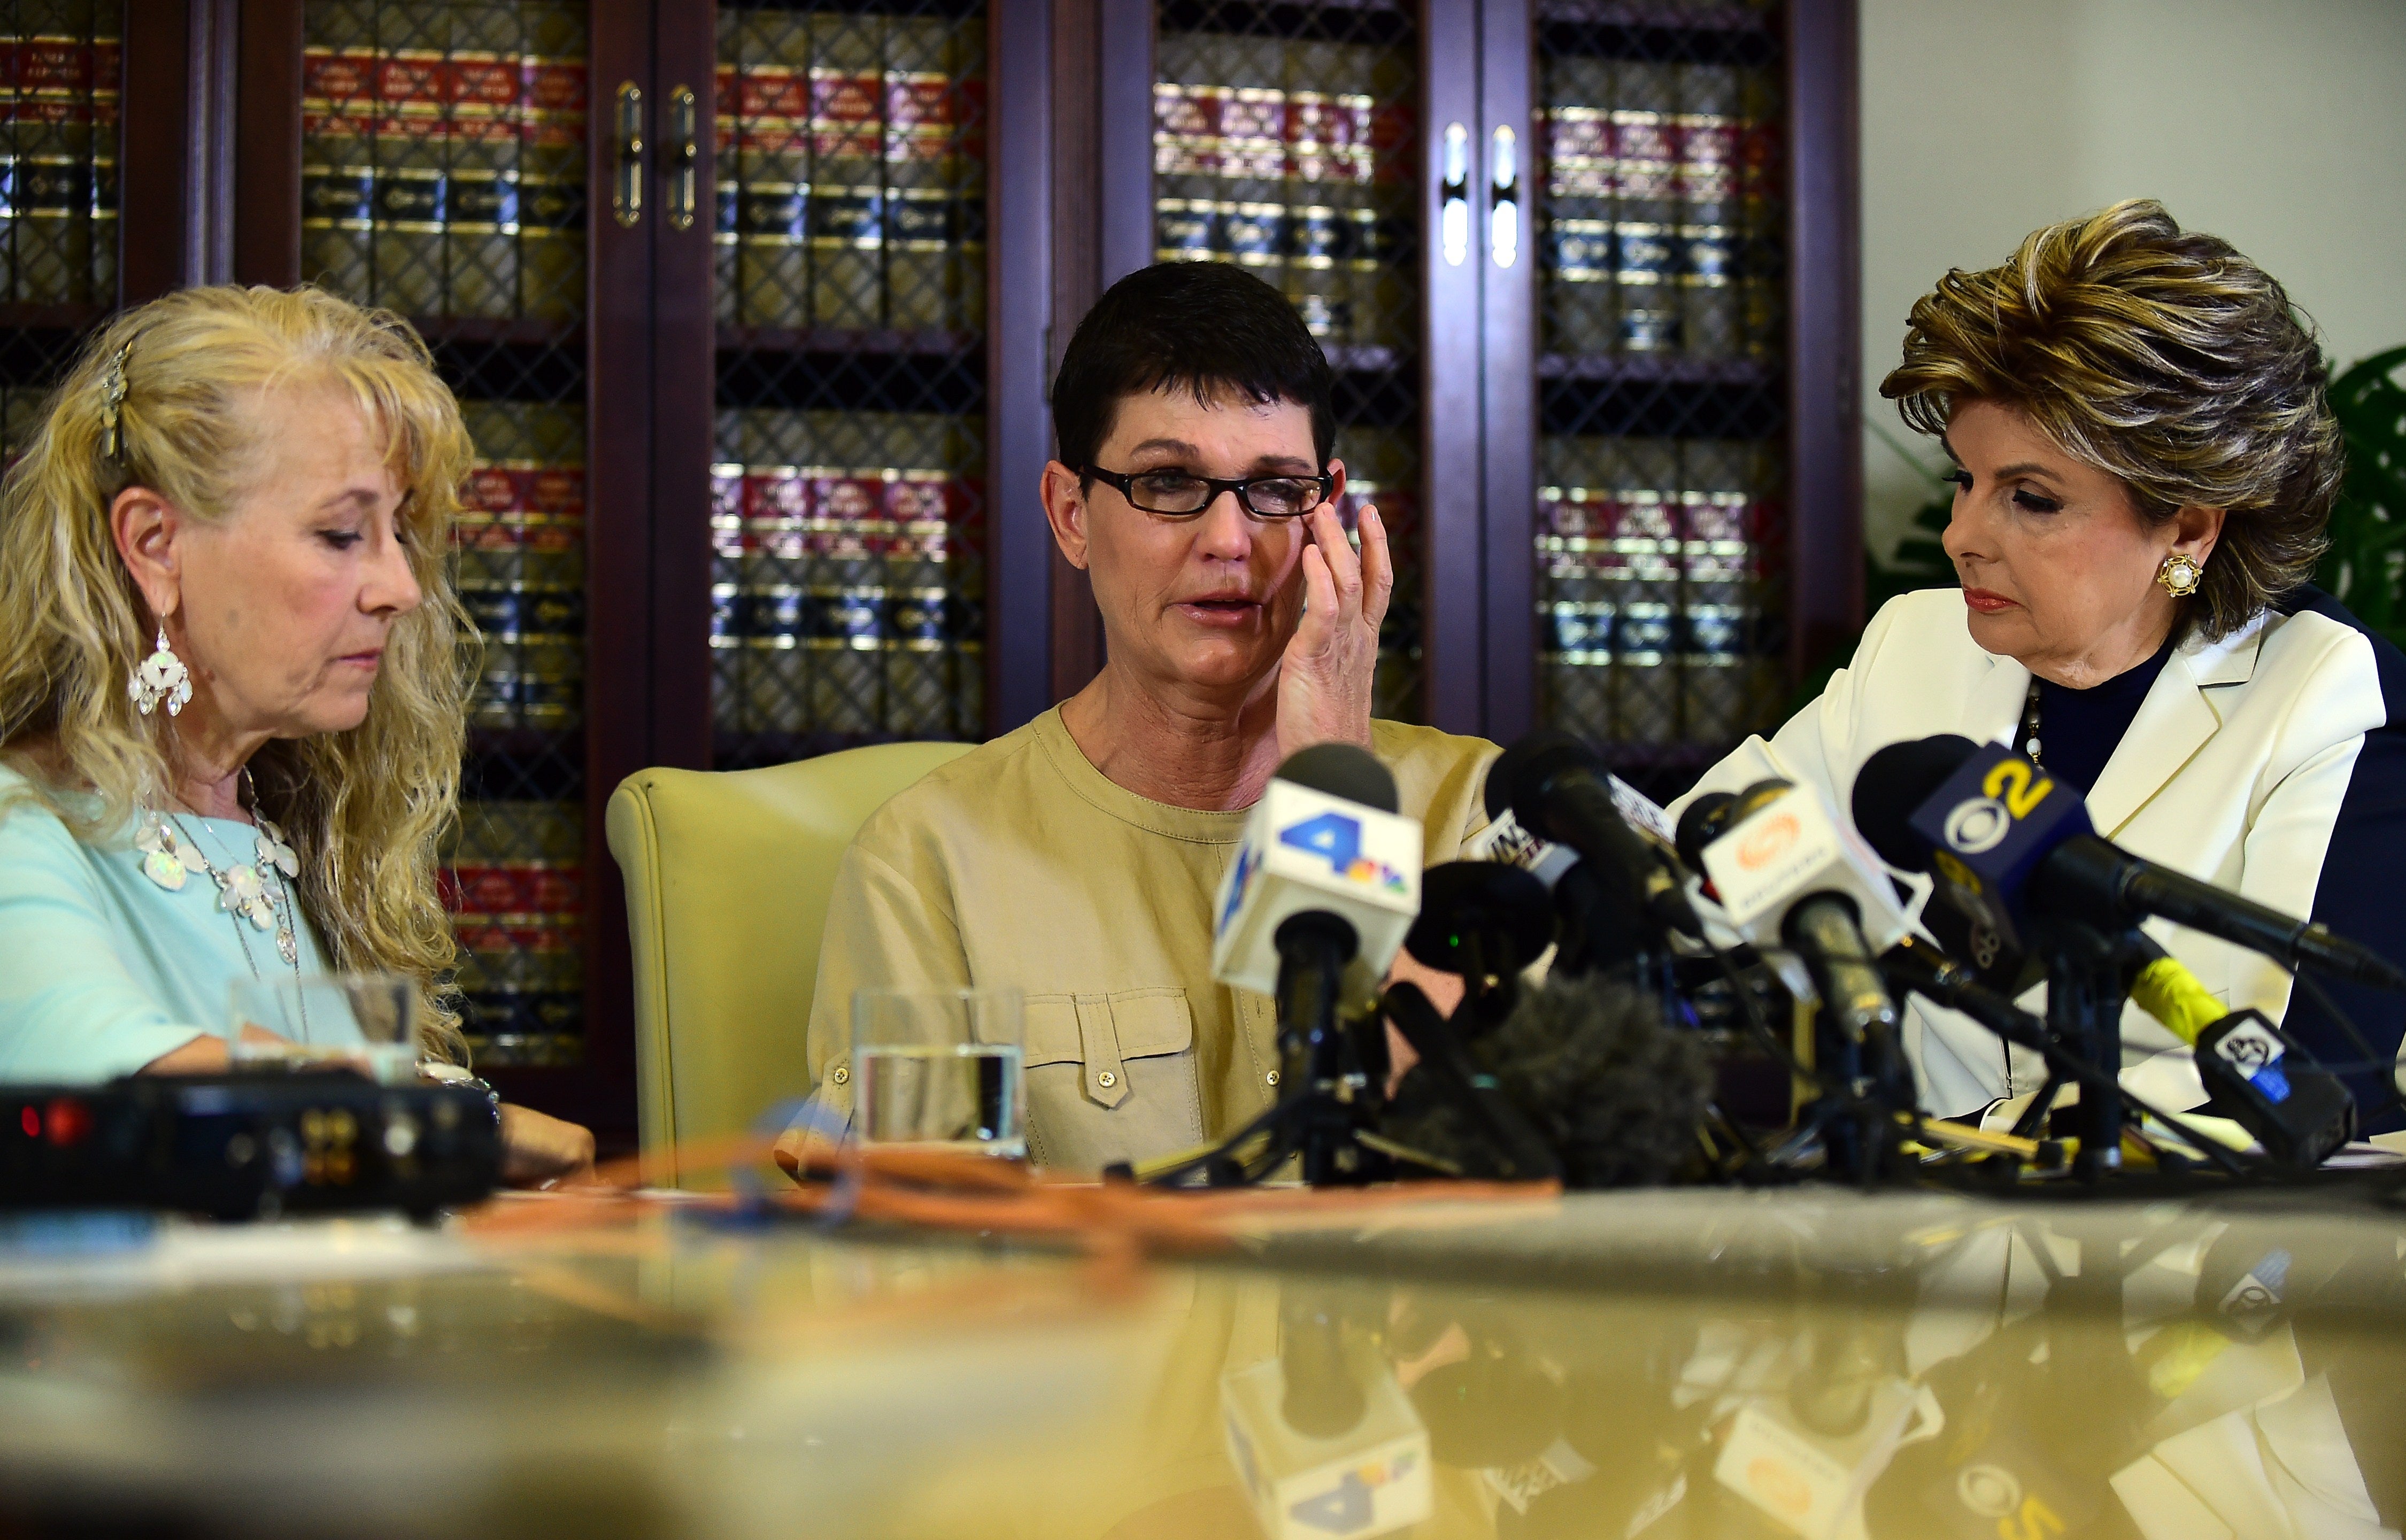 File image: Beth Ferrier reacts while speaking seated between attorney Gloria Allred and Rebecca Lynn Neal